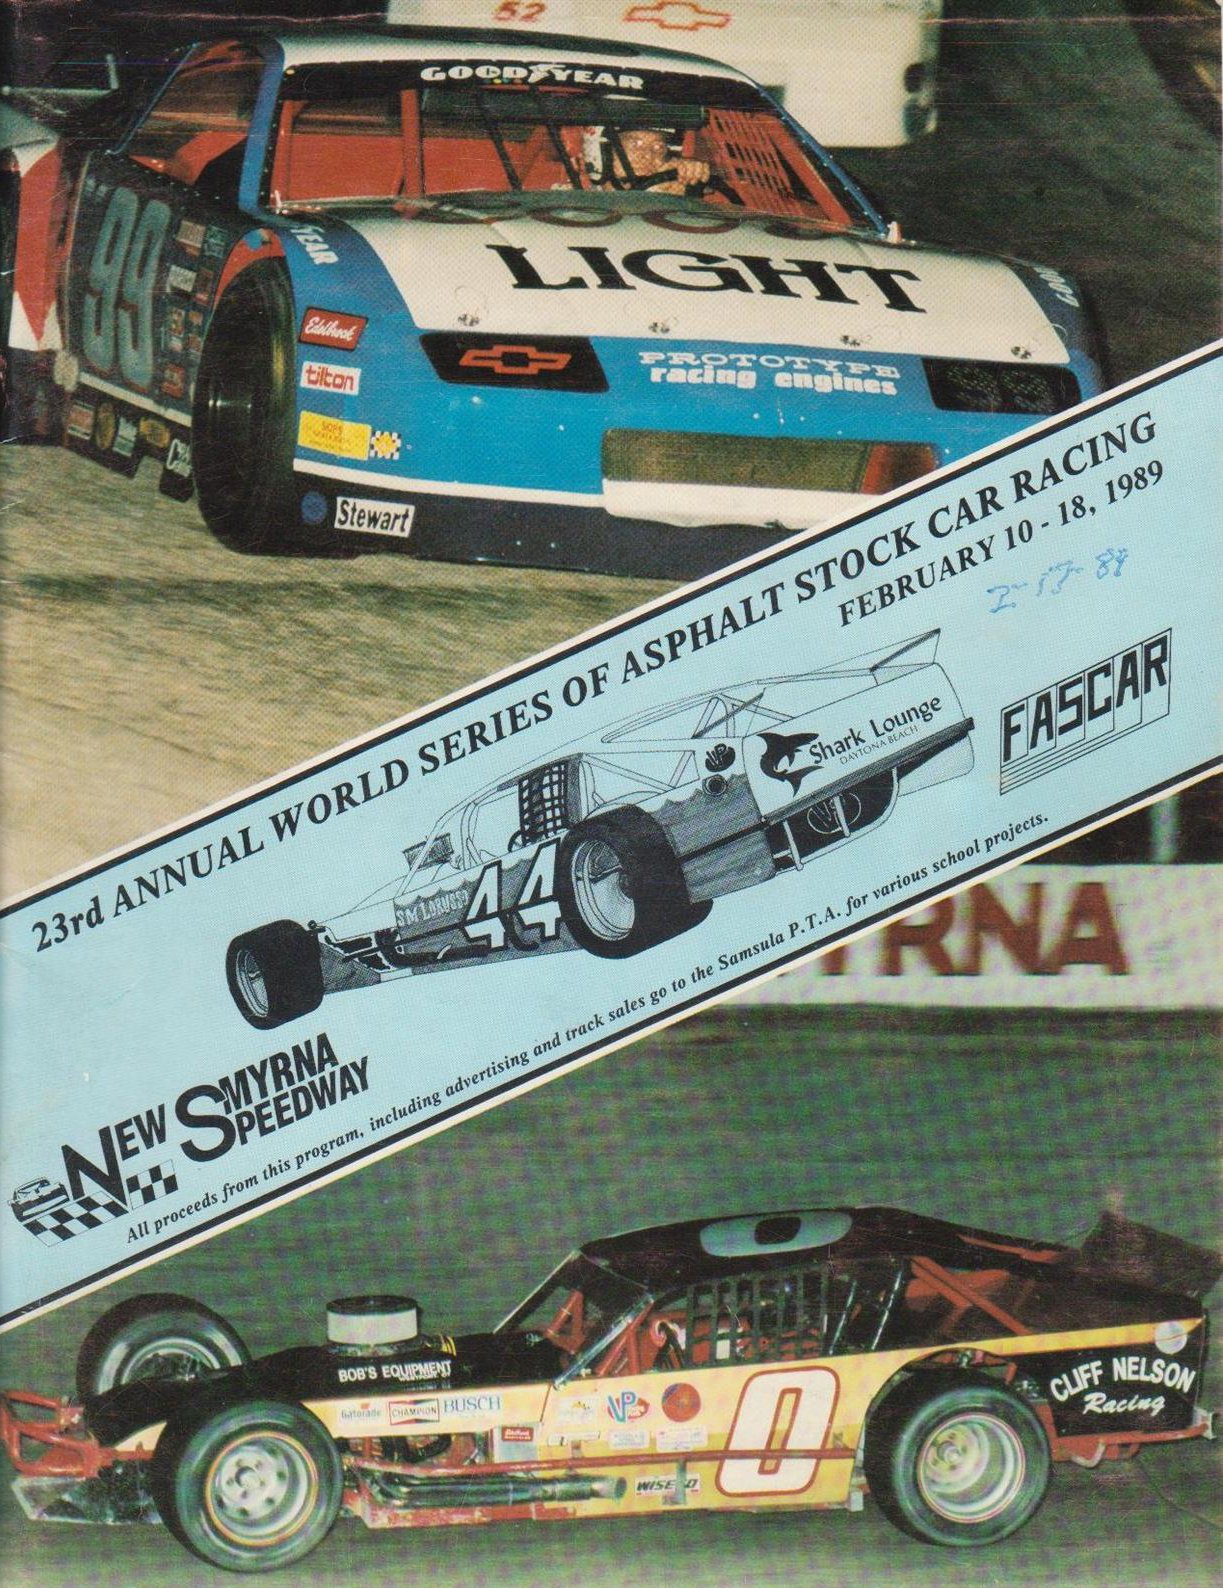 New Smyrna Speedway The Motor Racing Programme Covers Project